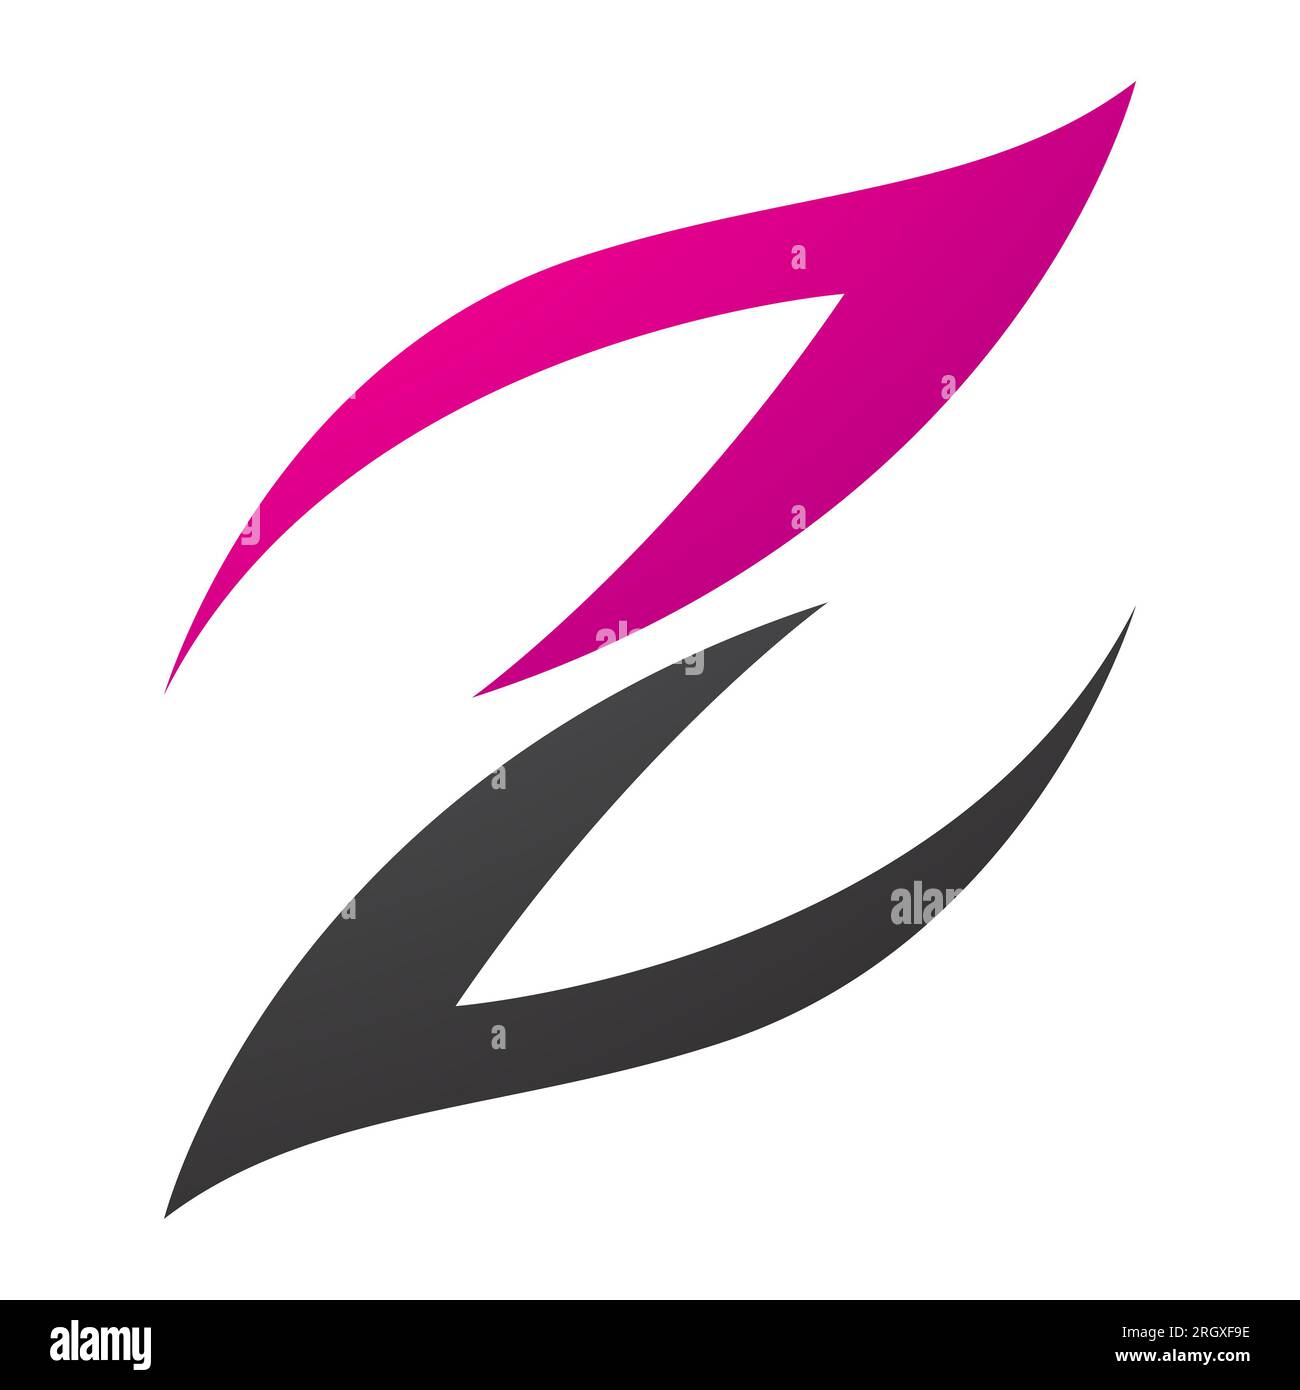 Magenta and Black Fire Shaped Letter Z Icon on a White Background Stock Photo